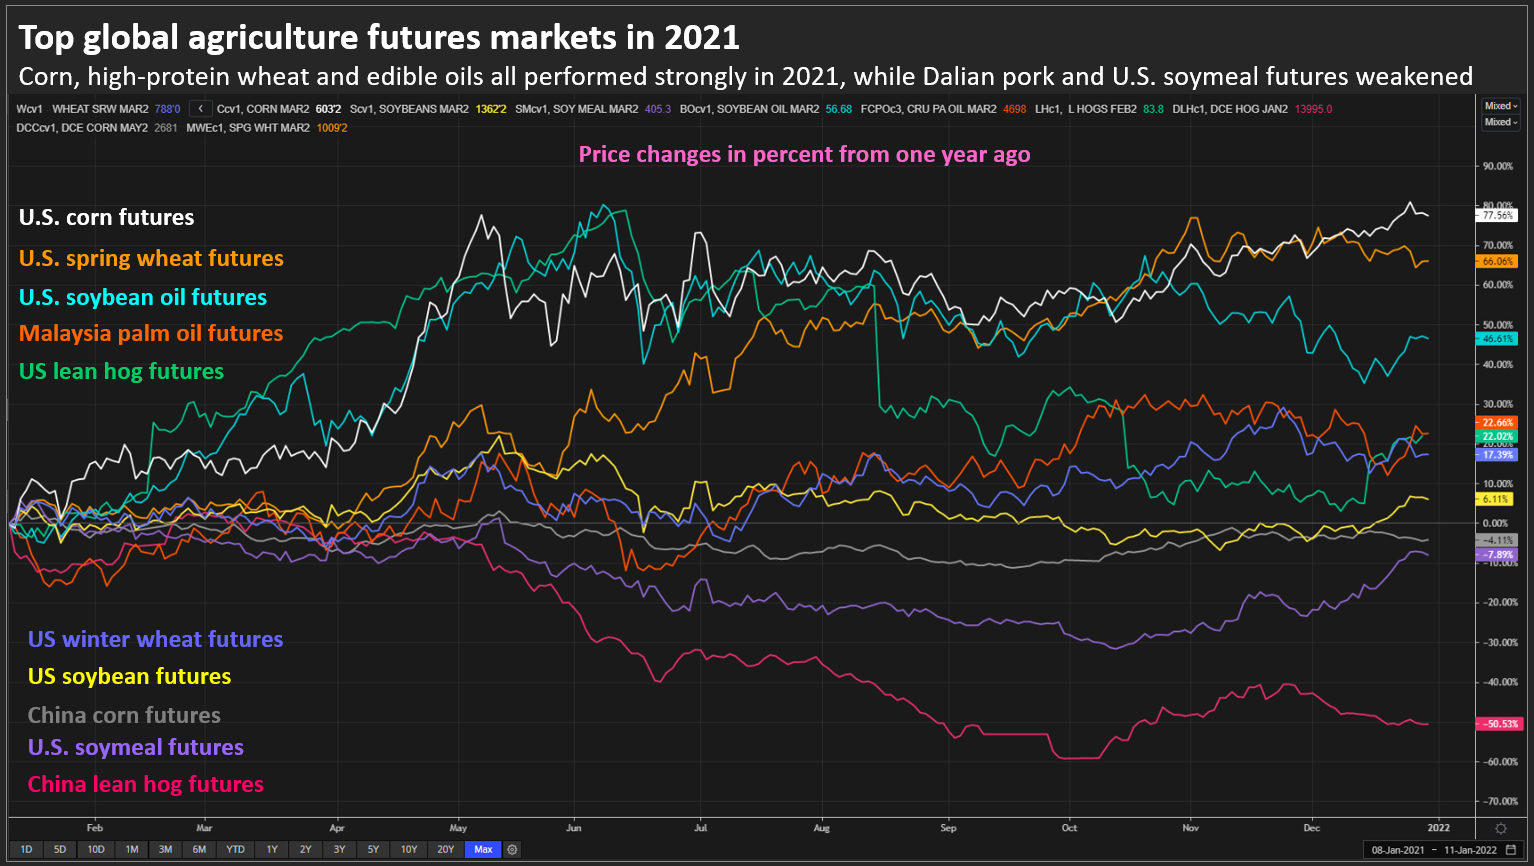 Top global agriculture futures markets in 2021